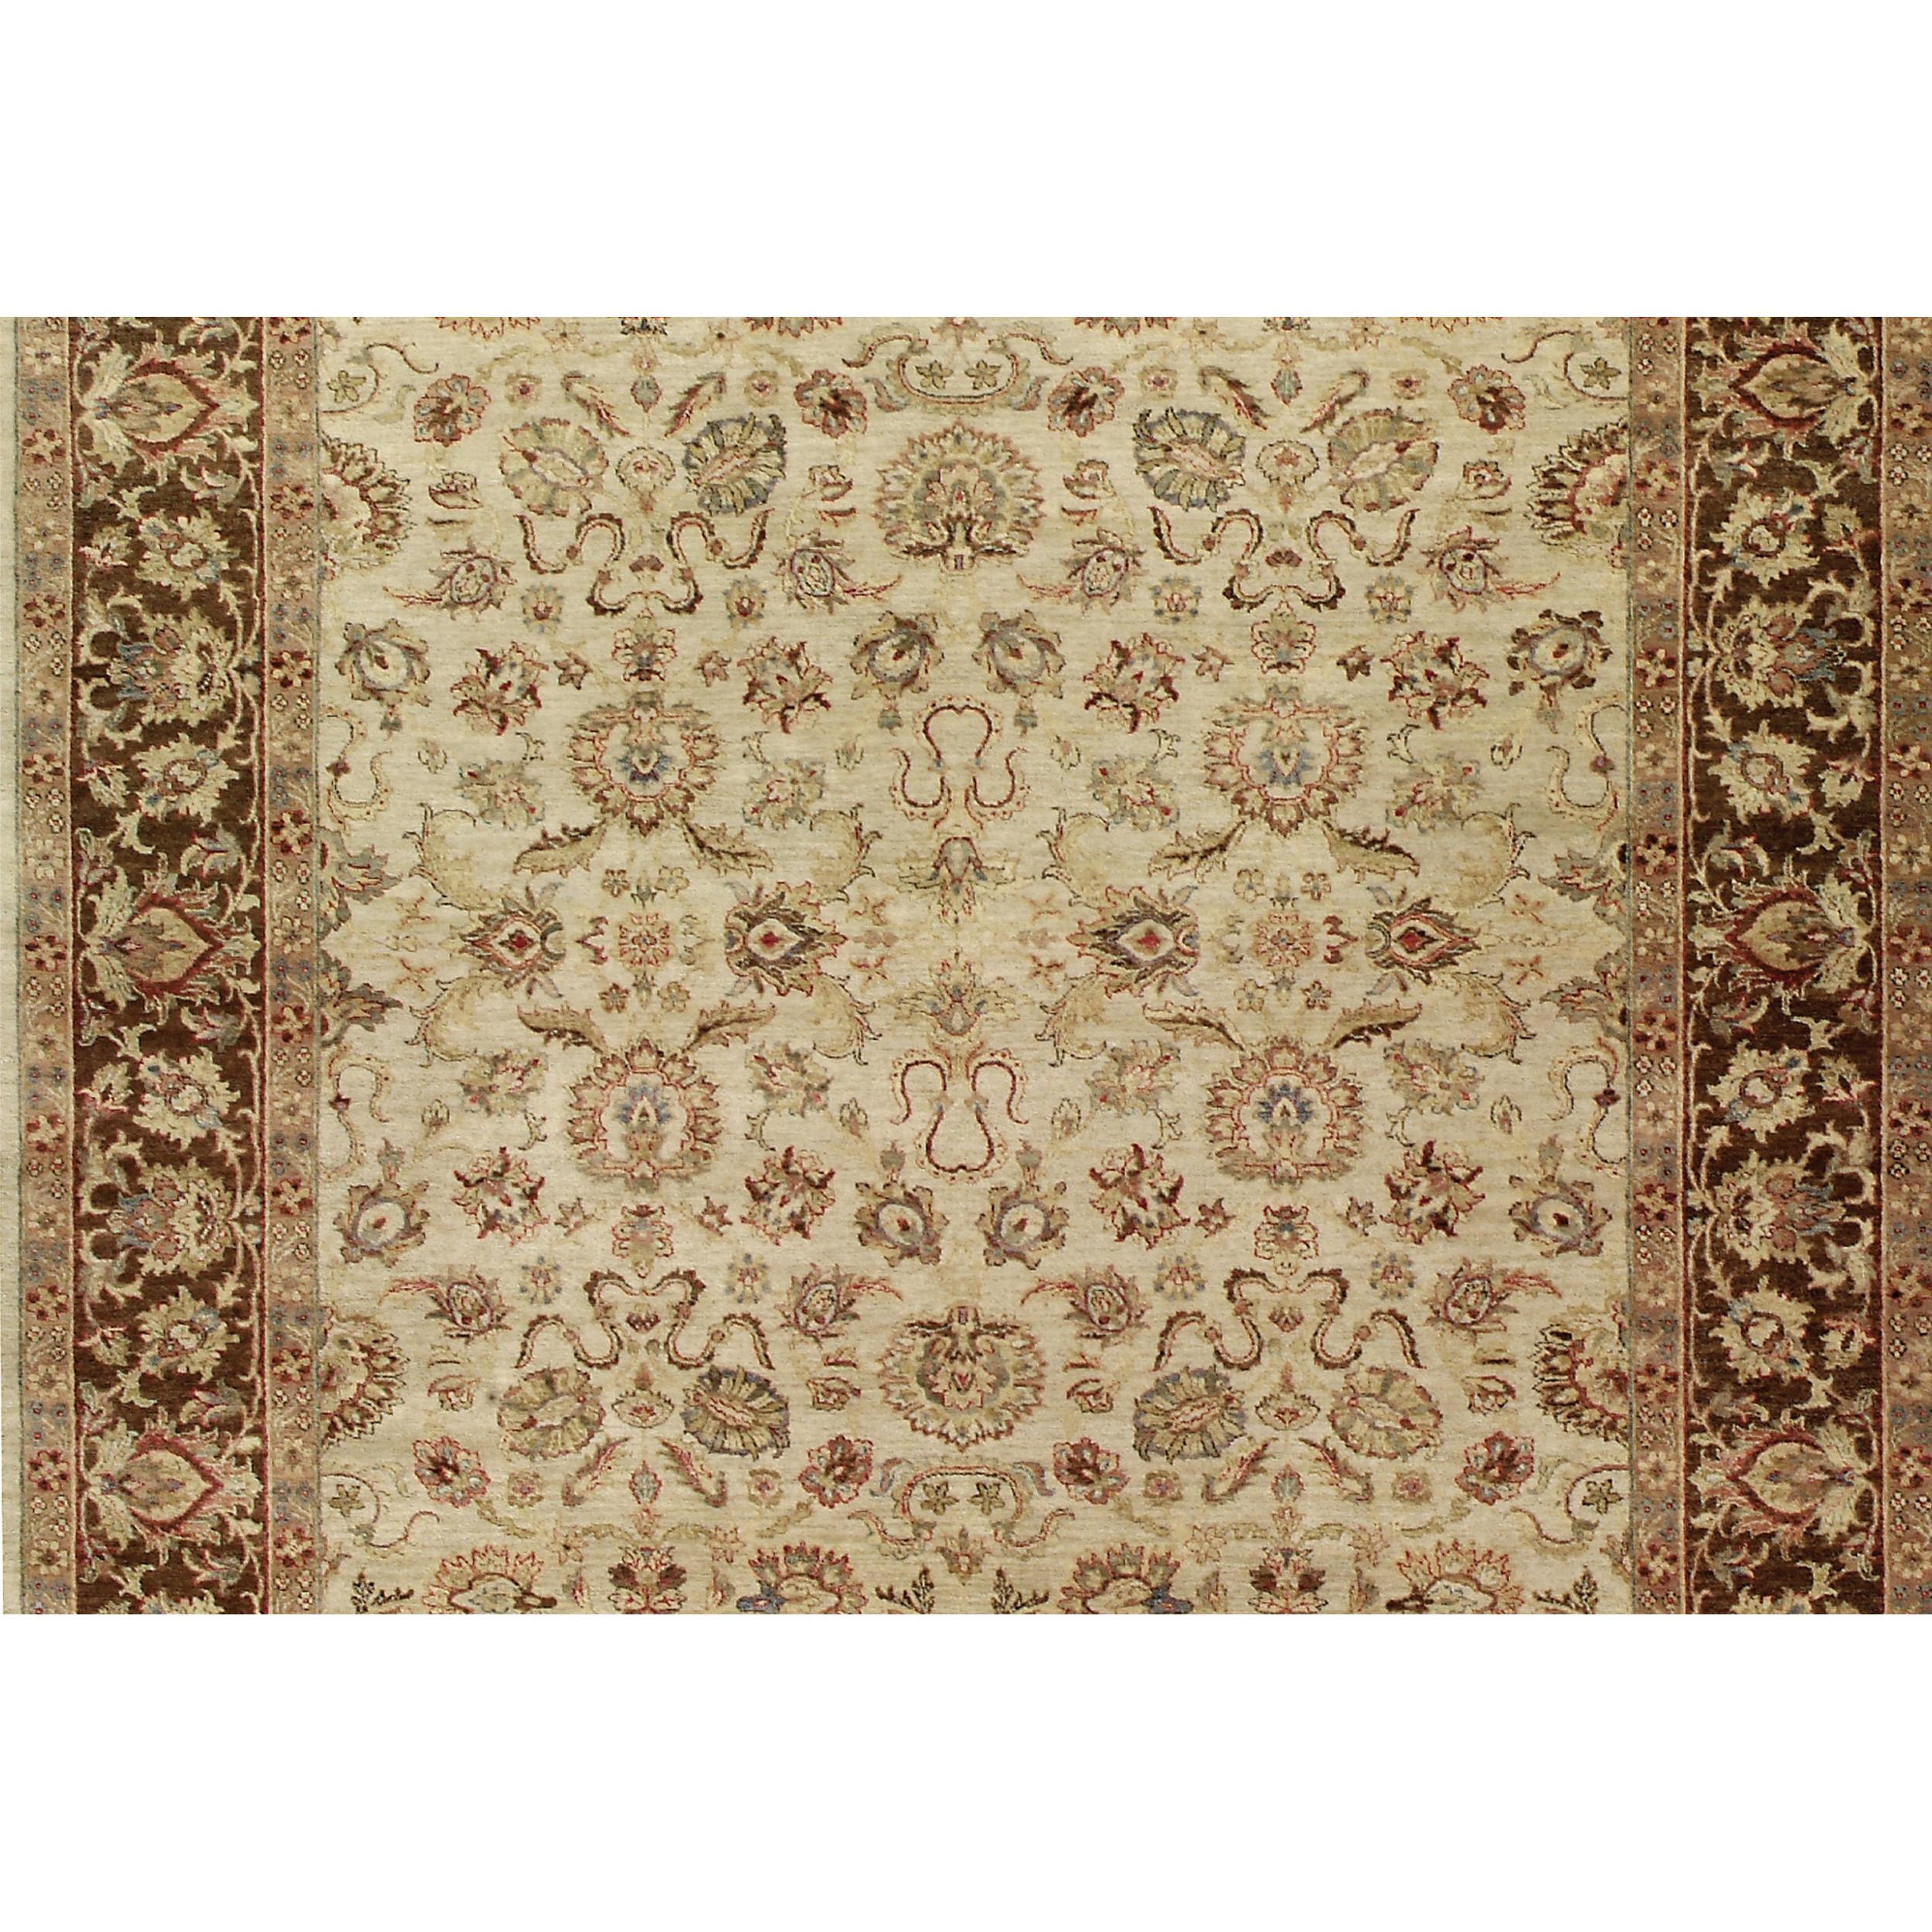 Indian Luxury Traditional Hand-Knotted Cream/Mocha 12X24 Rug For Sale